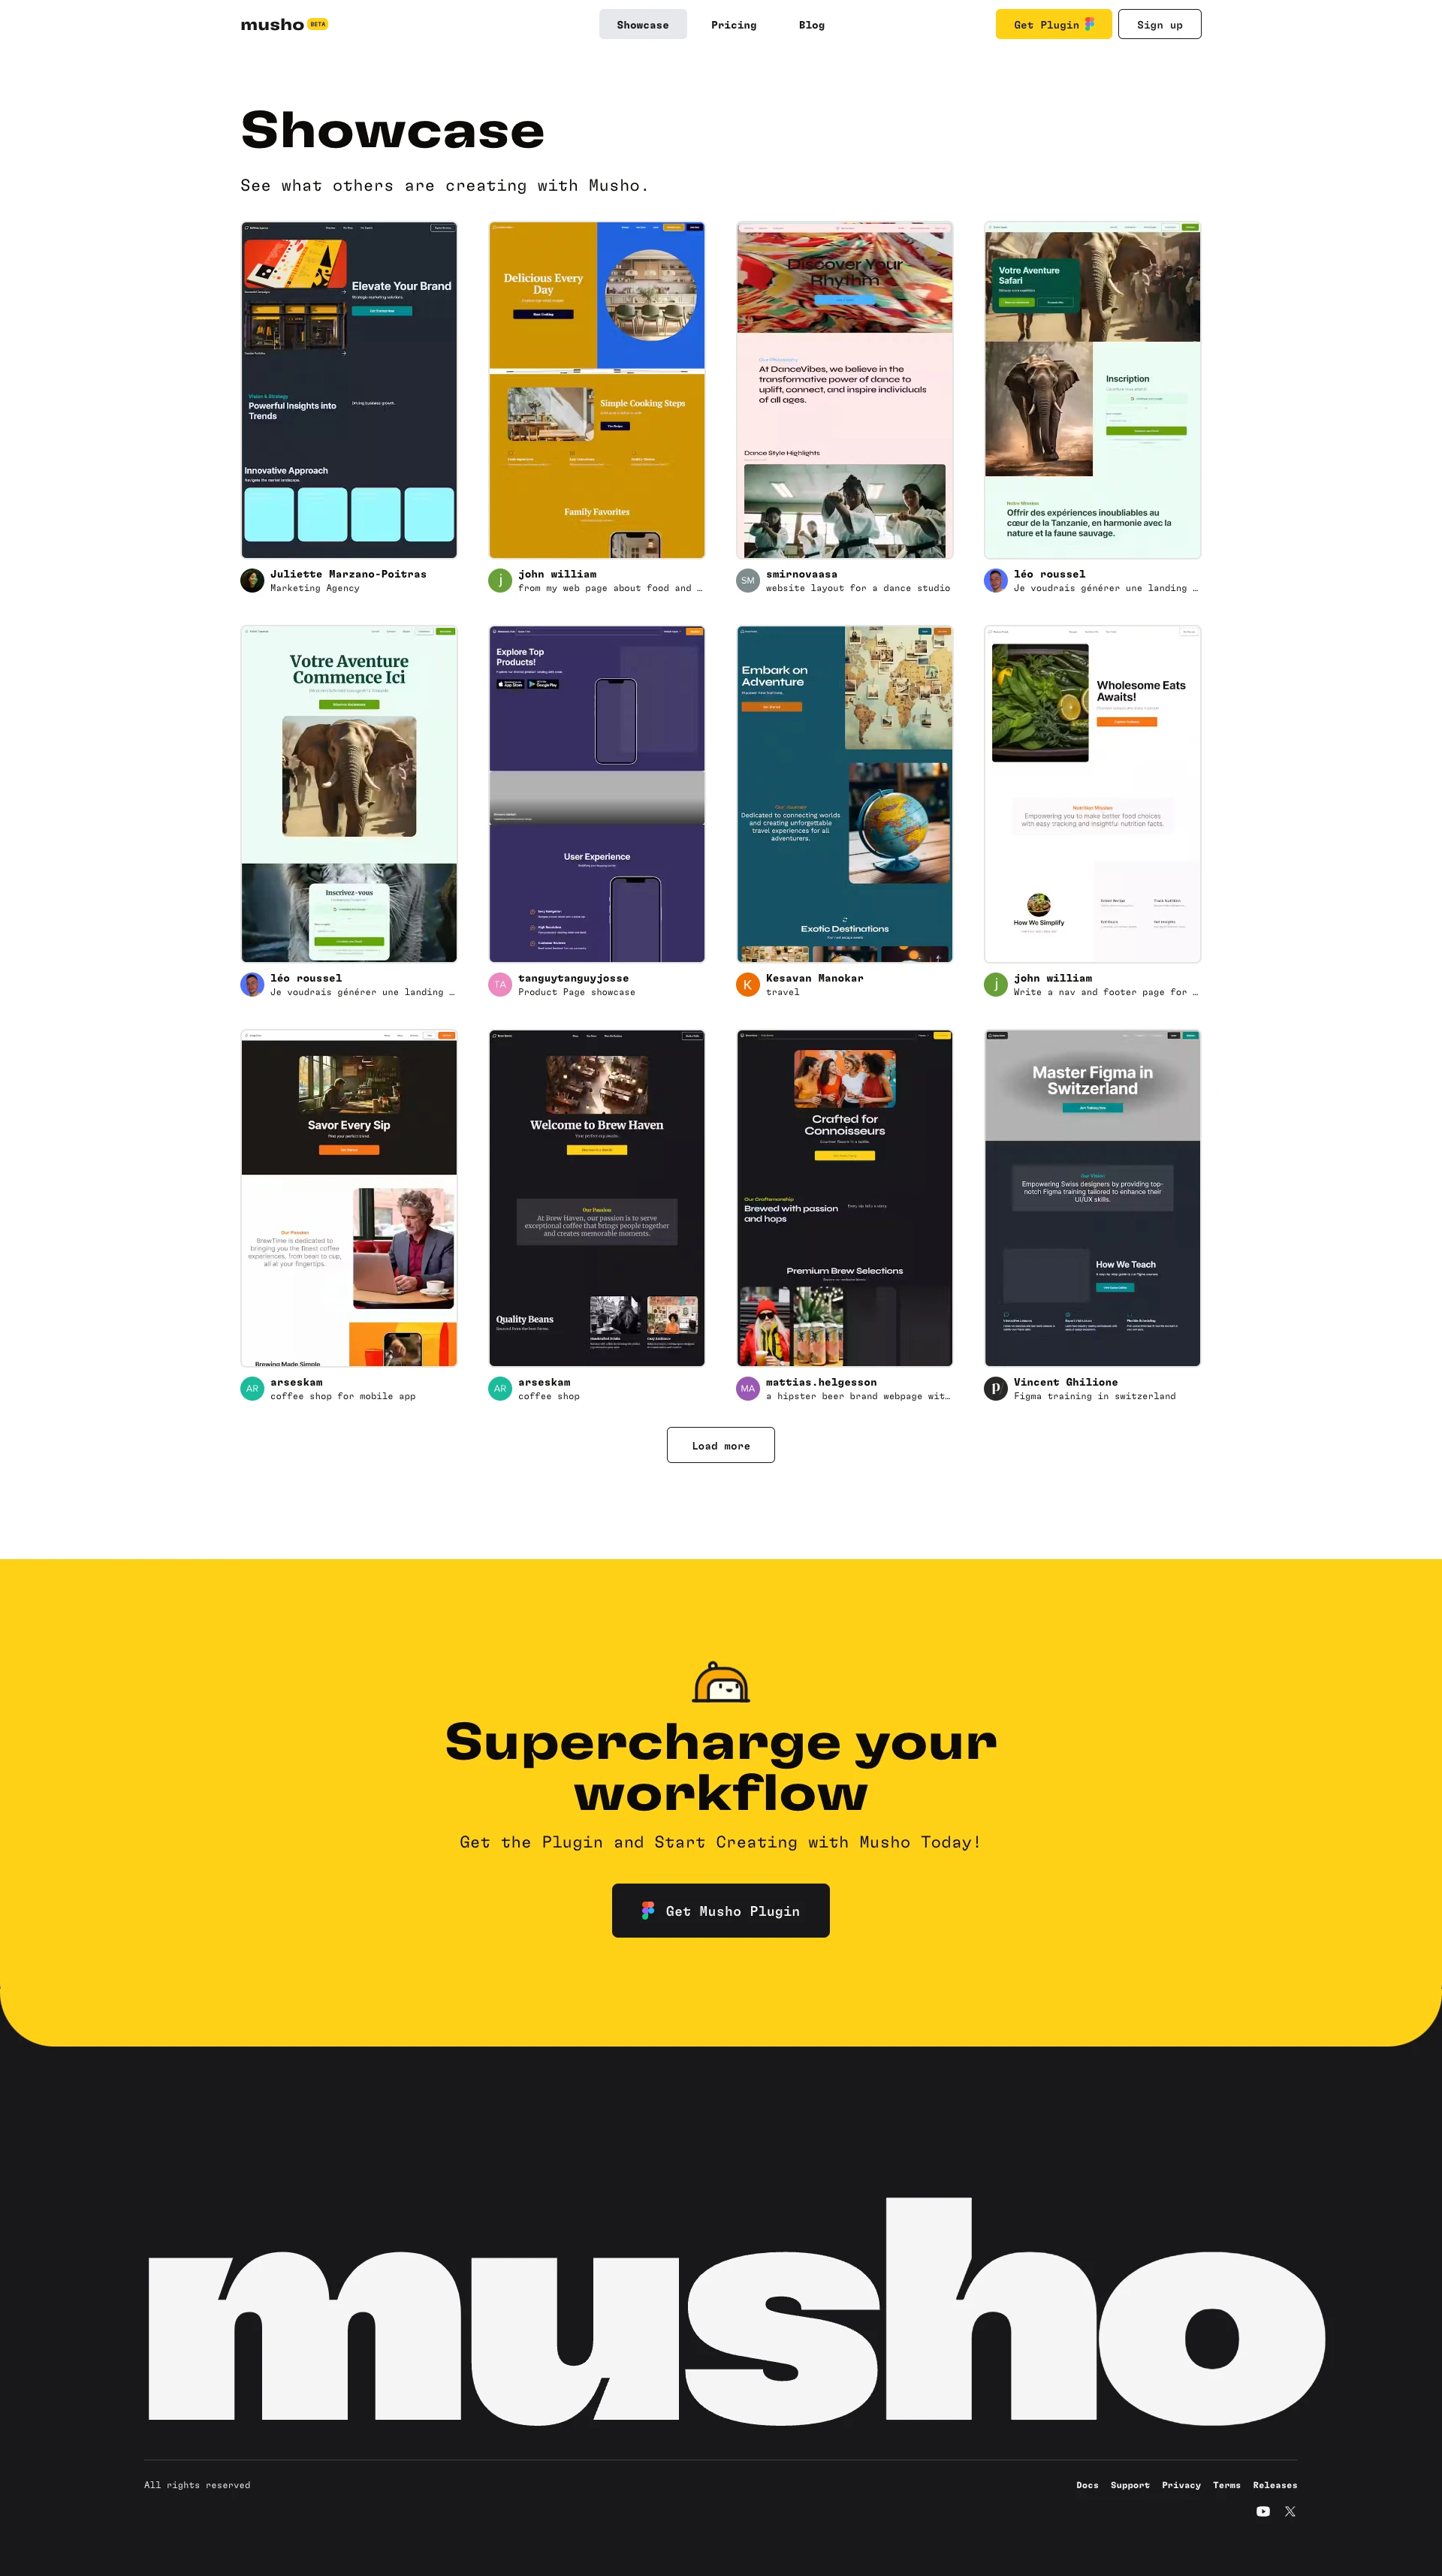 Musho.ai Landing Page Example: Musho turns your prompts into nearly-complete, dev-ready websites with simple layouts, great copy, and gorgeous images.